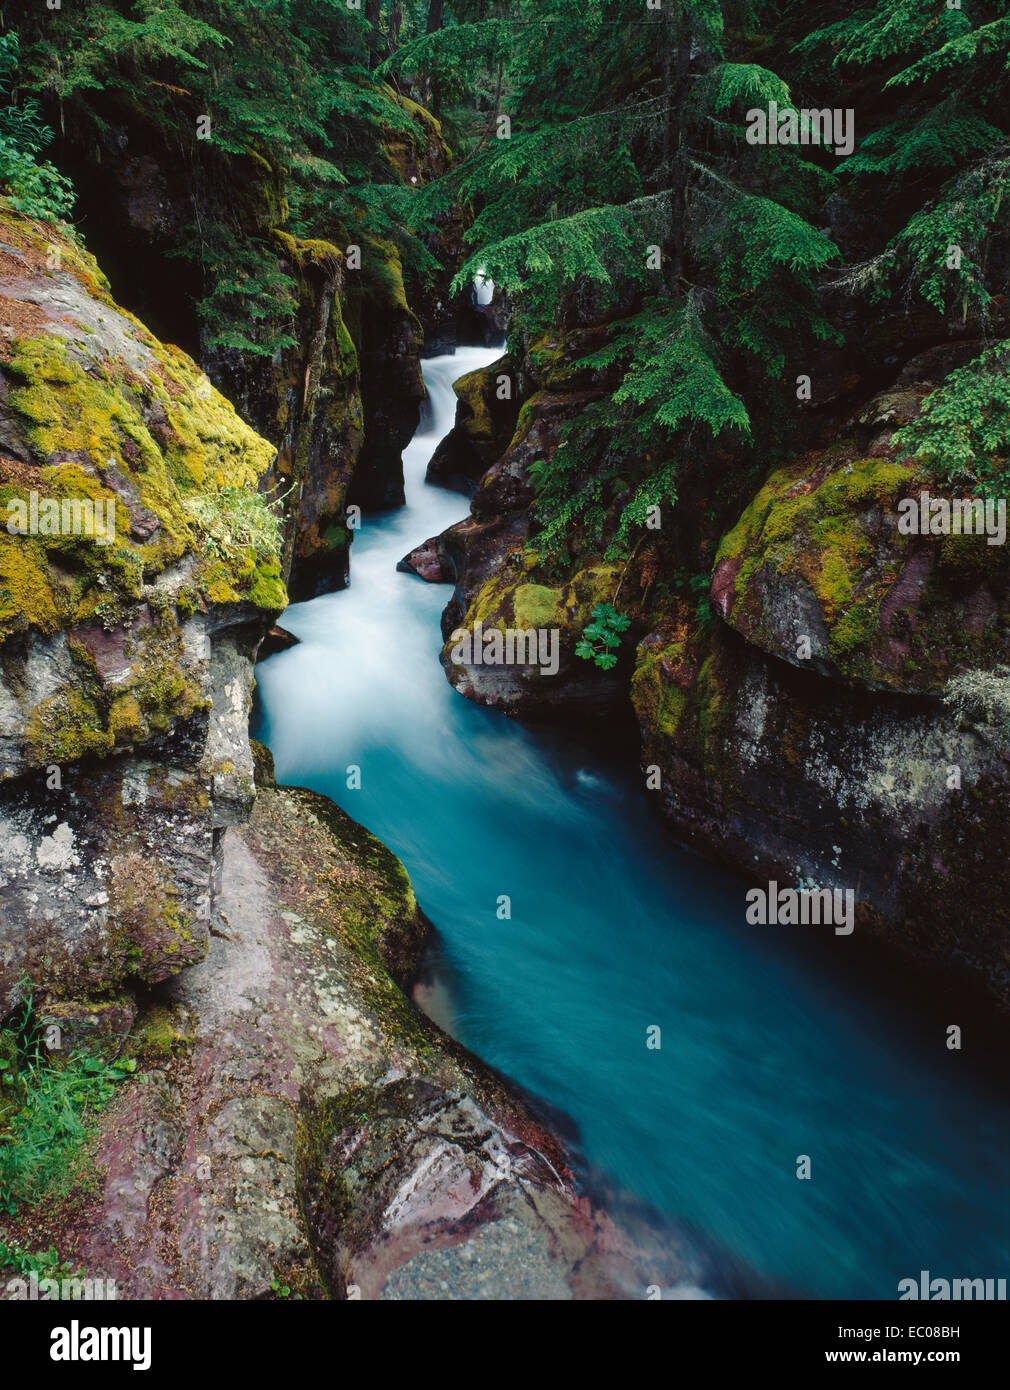 The deep blue water of famous Avalanche Creek gorge, rushes through a narrow passage. Glacier National Park, Montana Stock Photo